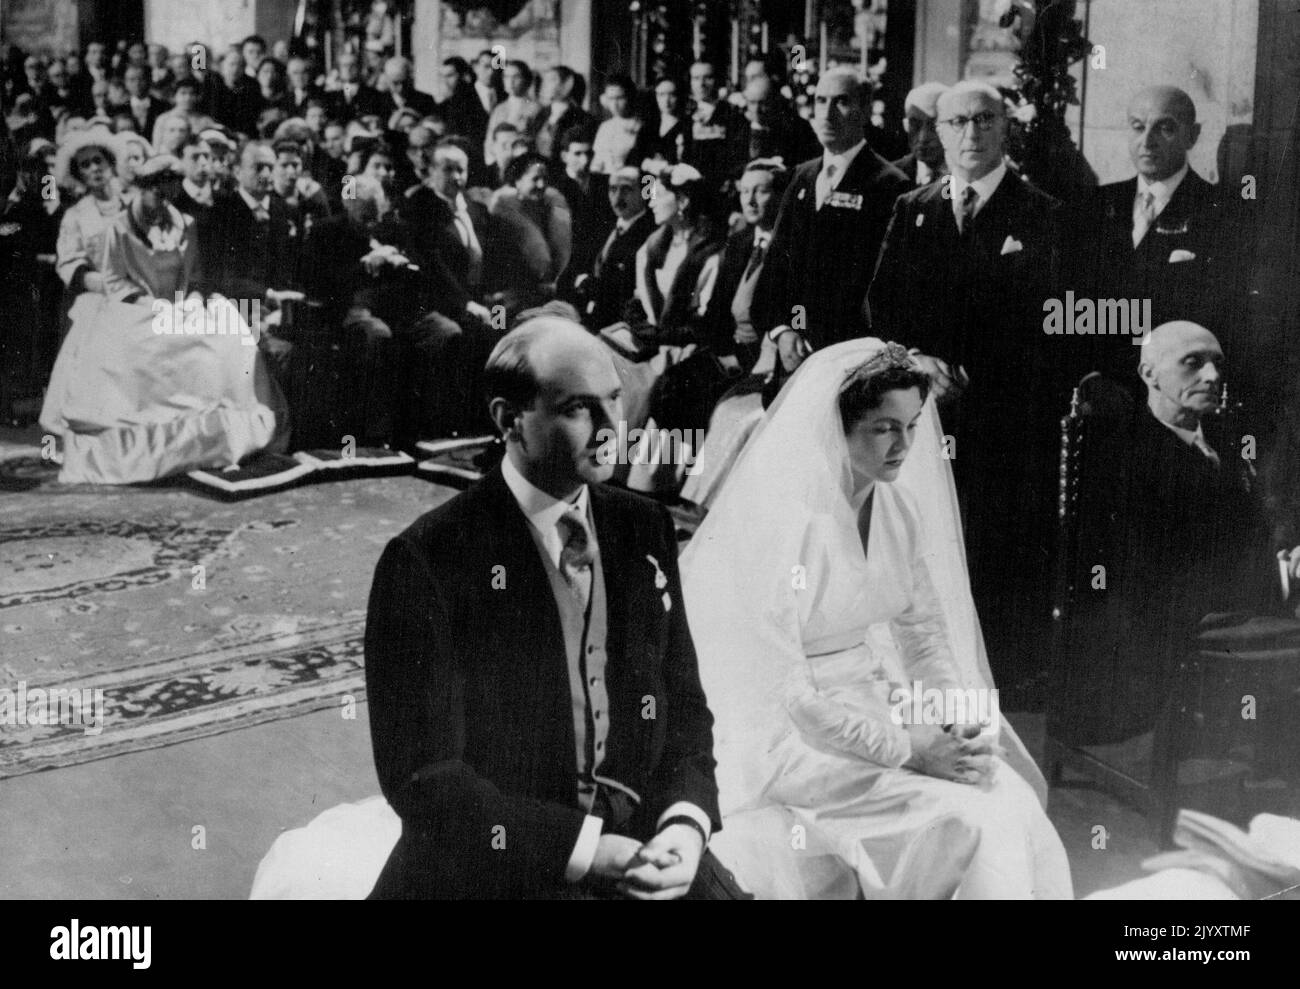 The Royal Wedding Photo Shows: Princes Maria Pia of Savoy and Prince Alexander seated in front of the alter during the wedding ceremony. The duchess of Kent (England) is seen in read (second row with leaning outwards wearing large *****) with her children the duke of Kent and Princess Alexandra beside her. The Royal Wedding - Princess Maria Pia of Italy married Prince Alexander of Yugoslavia in the small while Church at Casais. A Tiny Fishing village 20 miles from Lisbon Portugal., February 12. Among the large number of Royal guests at the ceremony were six ex-Kings. These had favored places i Stock Photo